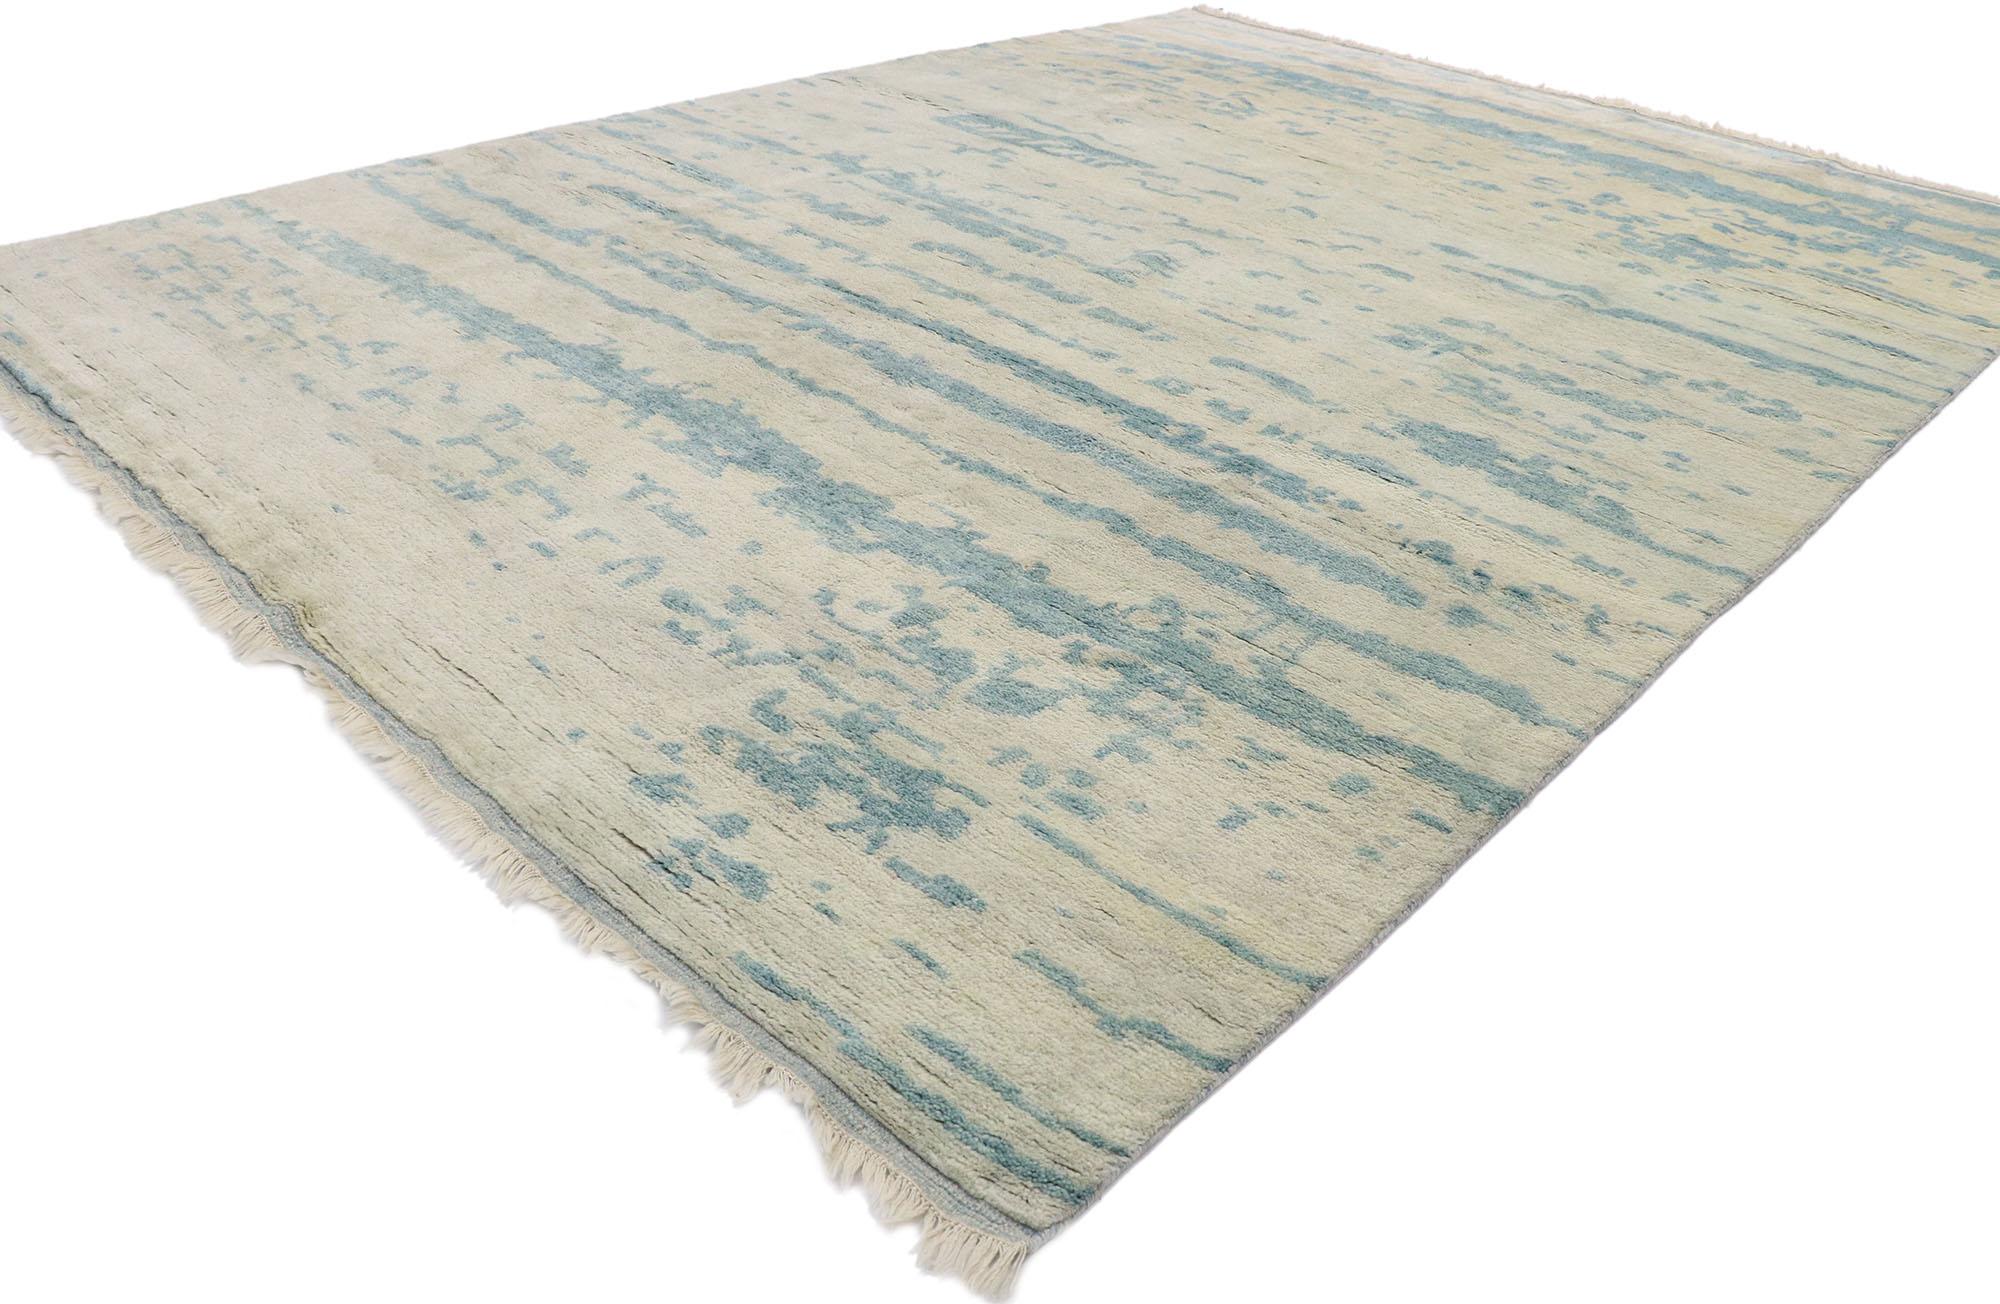 30539 new contemporary Moroccan Beach style rug with transitional coastal design. Coast into contemporary beach style and cozy contentment with this hand knotted wool contemporary Moroccan area rug. Showcasing an expressive yet subtle design,